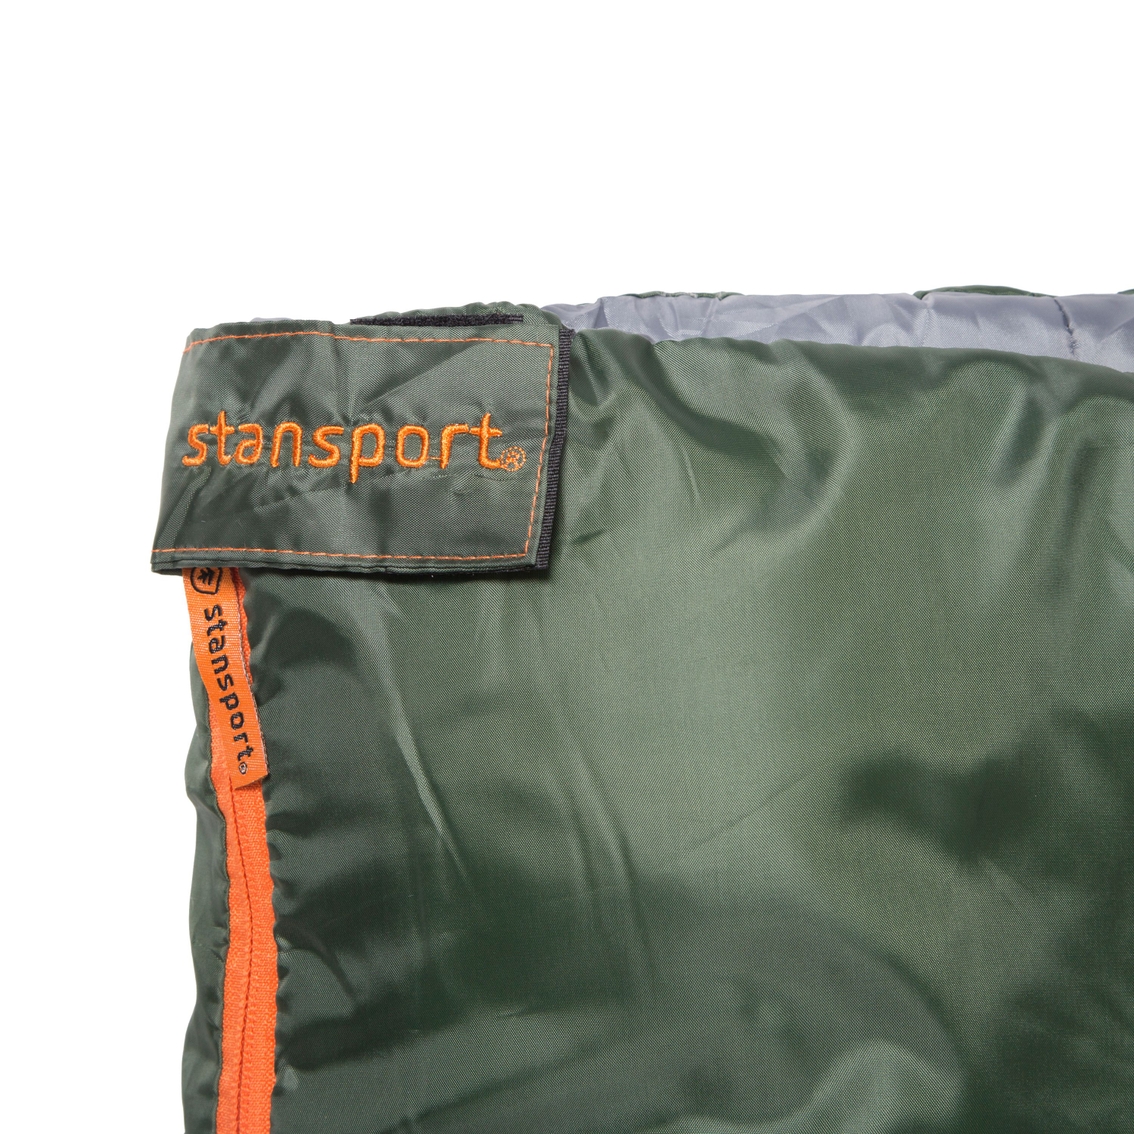 Stansport 3 LB Scout Sleeping Bag - Image 4 of 5